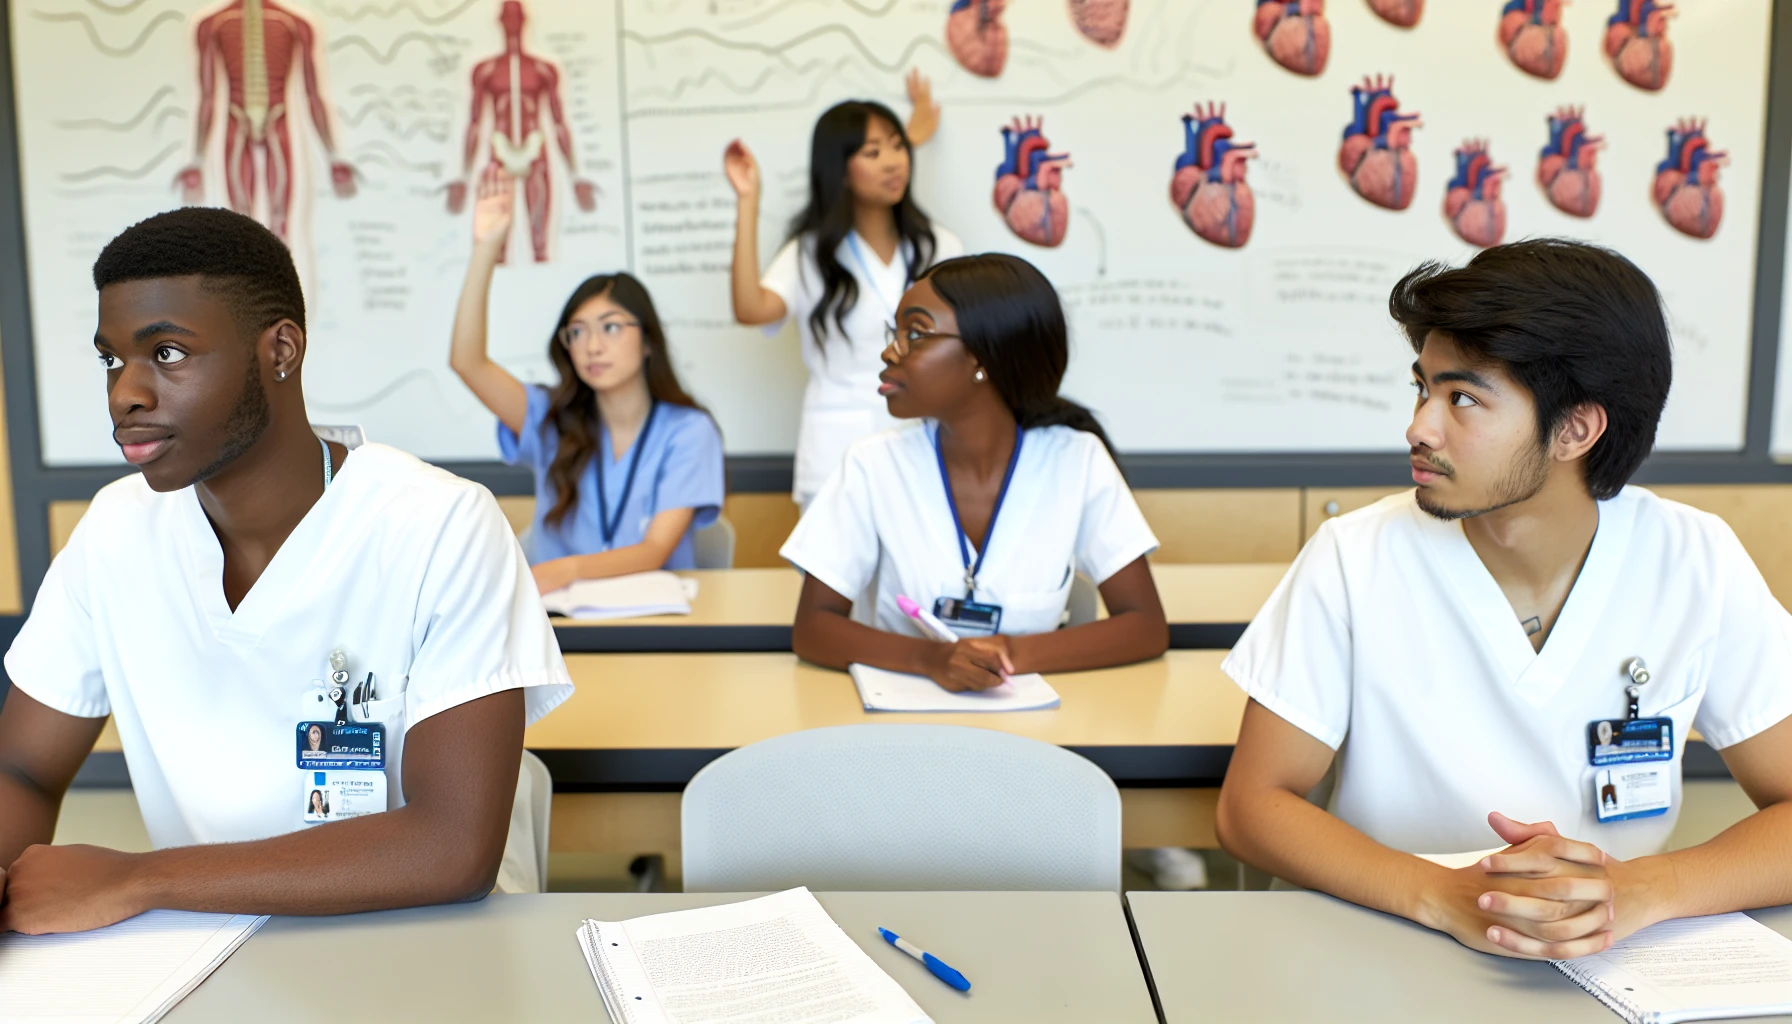 A group of nursing students in a classroom setting